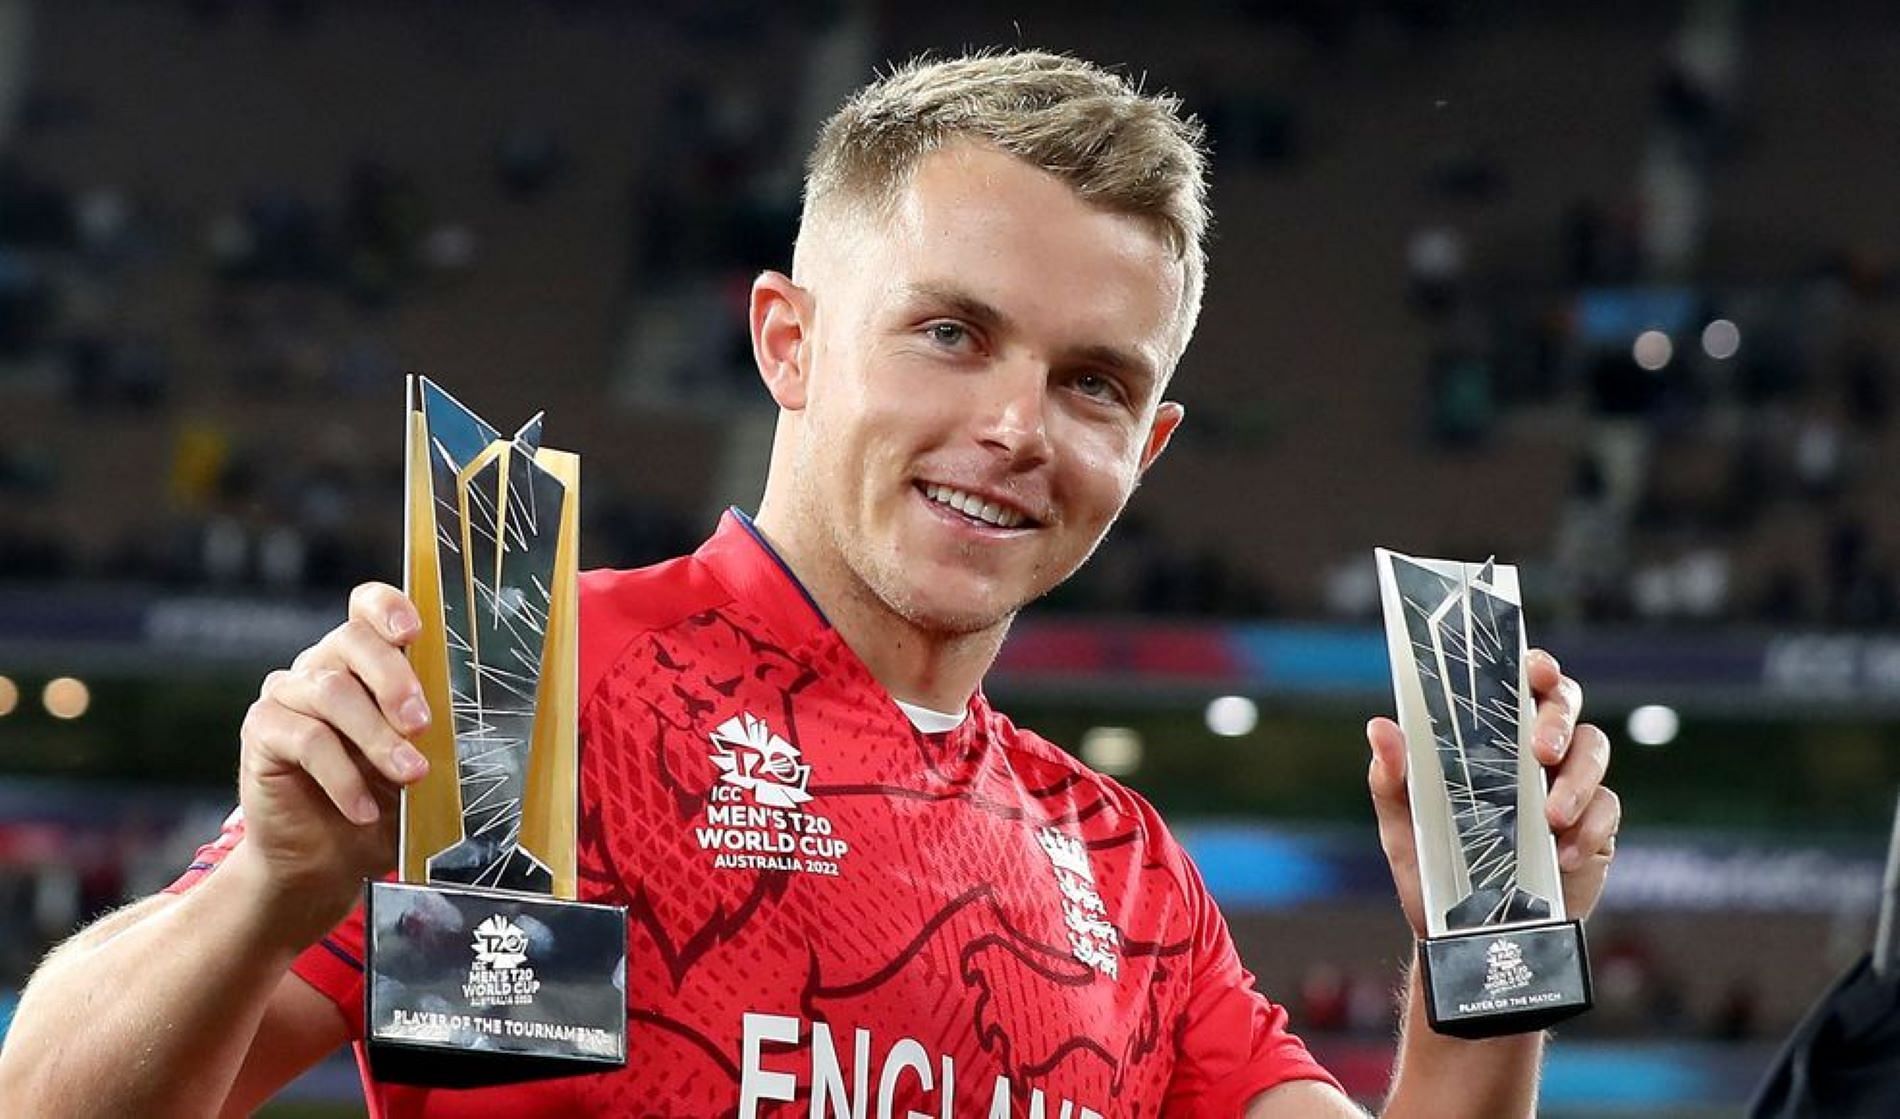 Sam Curran will hope to replicate his T20 World cup heroics in IPL 2023